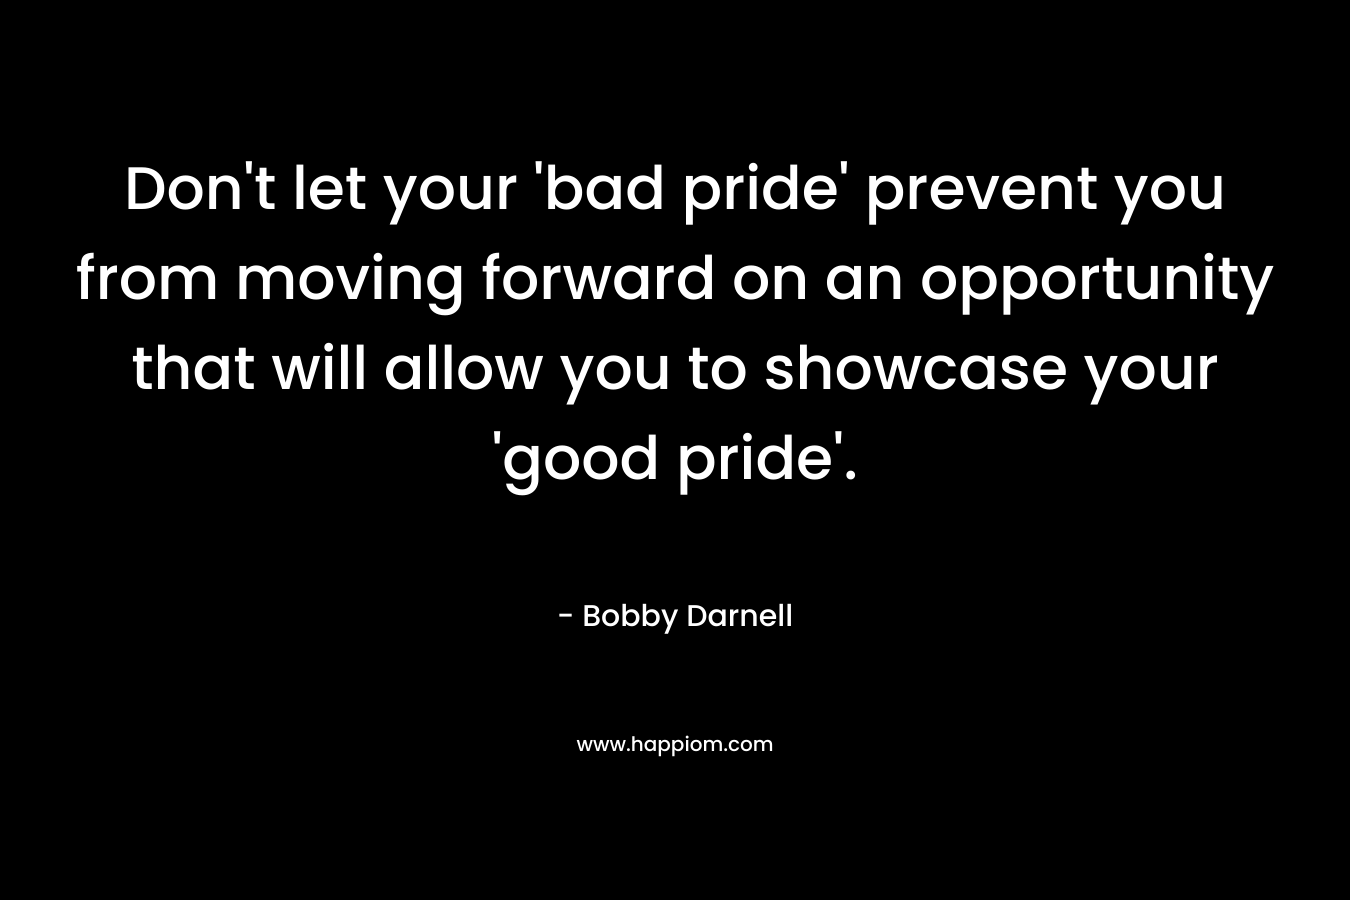 Don't let your 'bad pride' prevent you from moving forward on an opportunity that will allow you to showcase your 'good pride'.